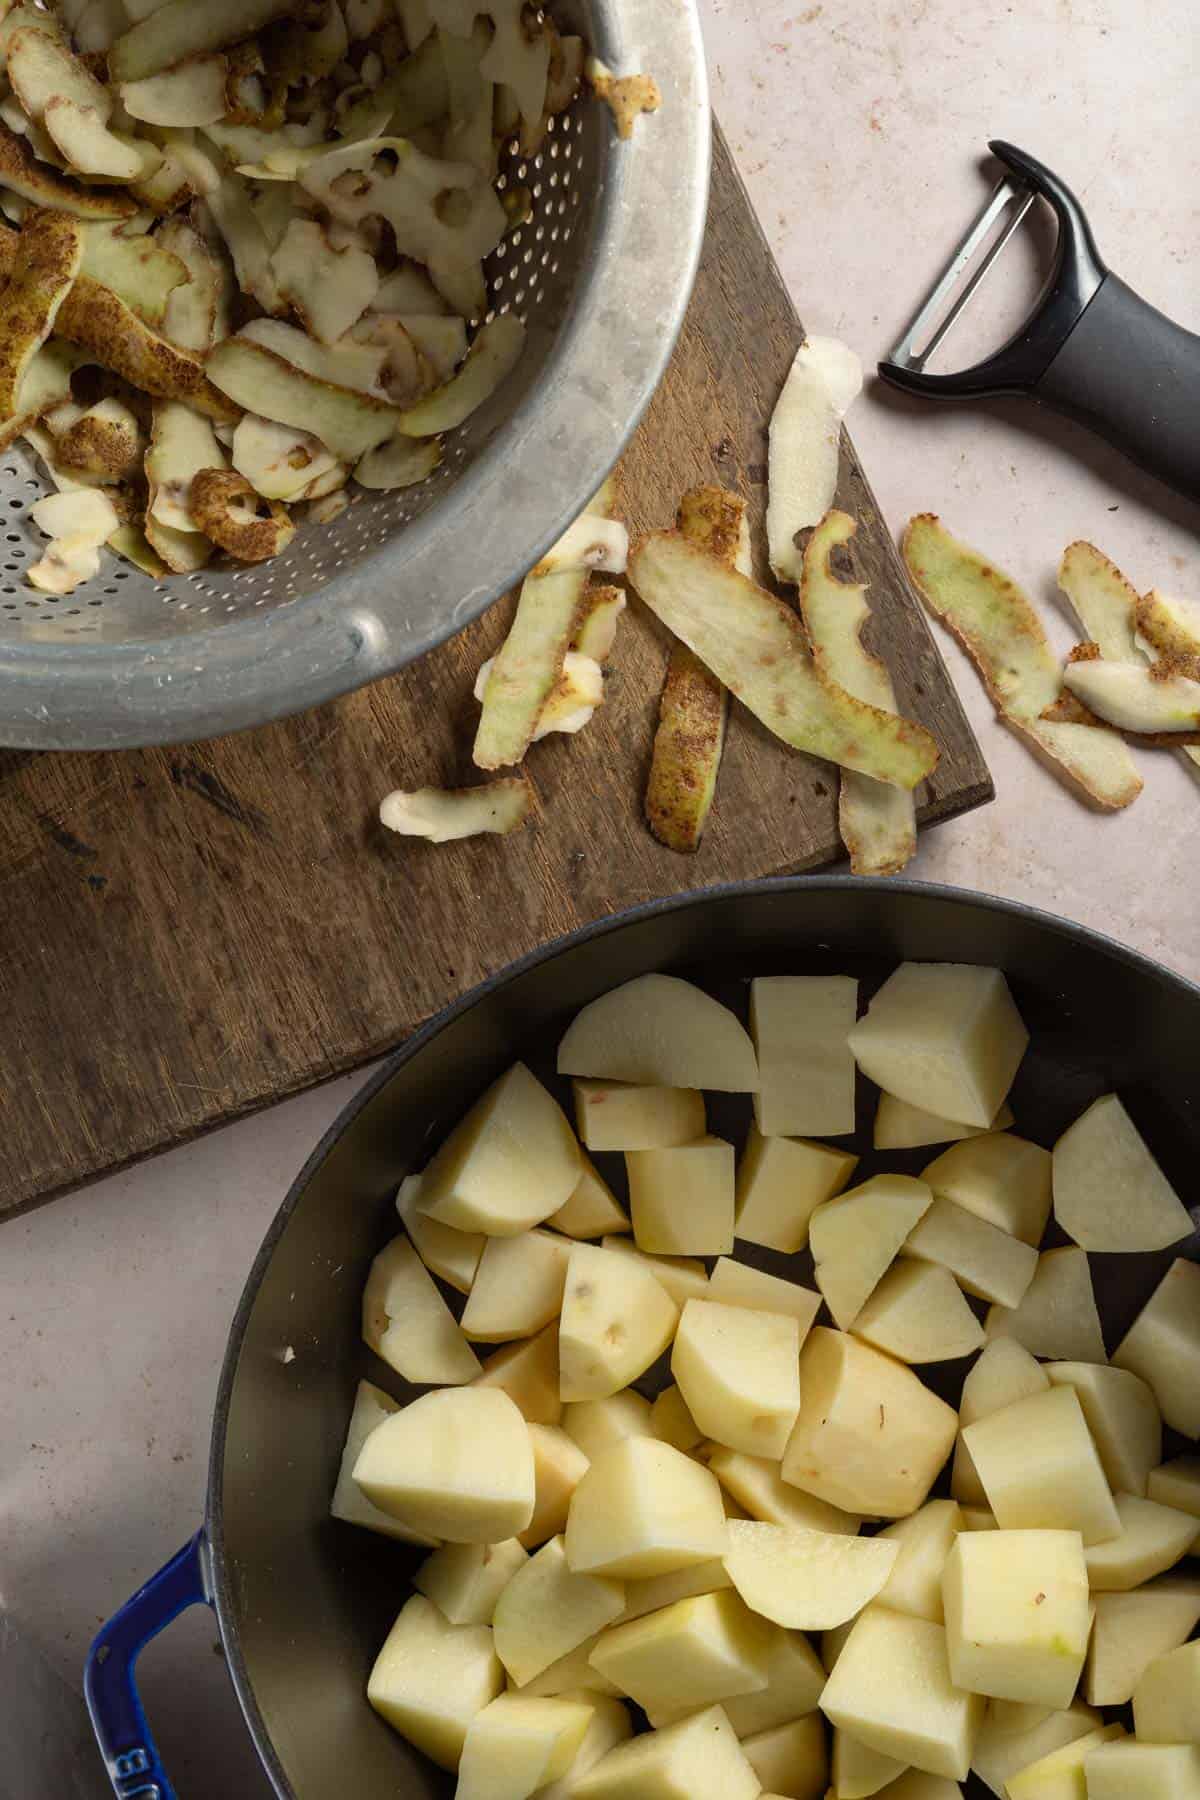 Peeled and diced potatoes in a pot.